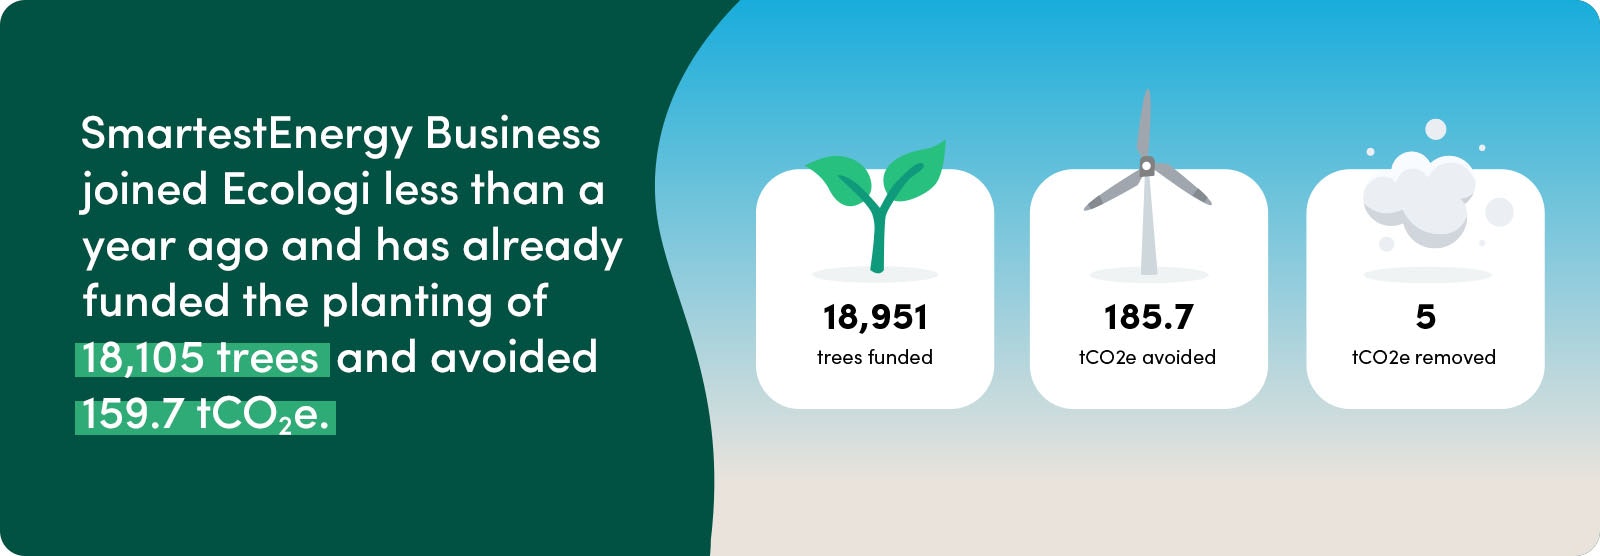 SmartestEnergy Business joined Ecologi less than a year ago and has already funded the planting of 18,951 trees and avoided 185.7 tonnes of CO2e.